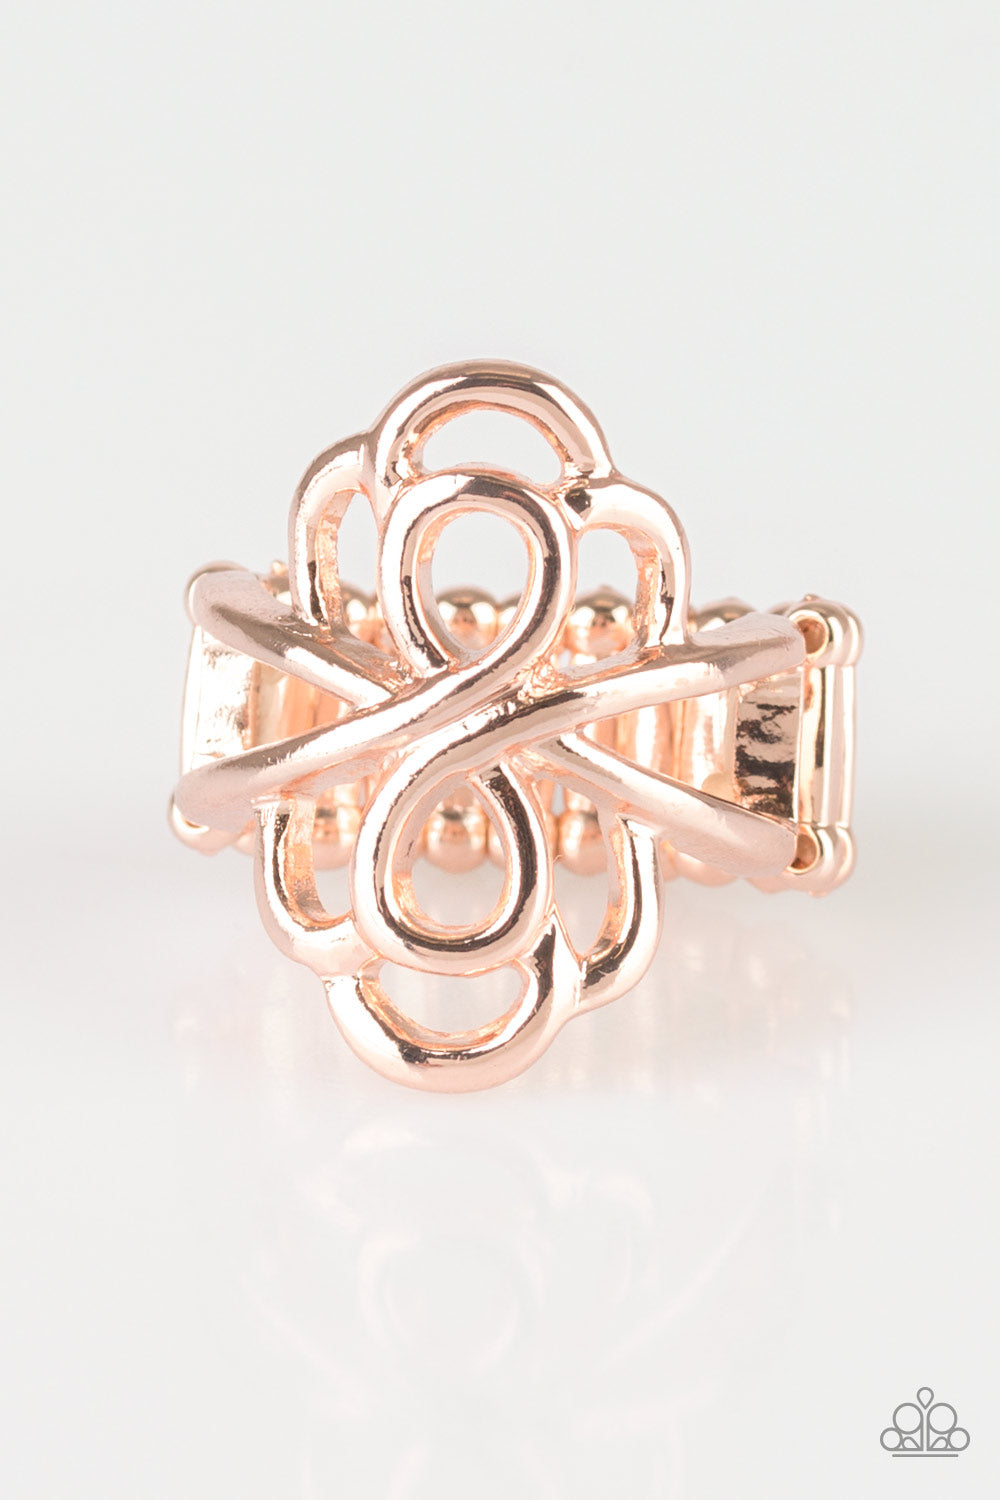 Ever Entwined Gold Paparazzi Rings Cashmere Pink Jewels - Cashmere Pink Jewels & Accessories, Cashmere Pink Jewels & Accessories - Paparazzi